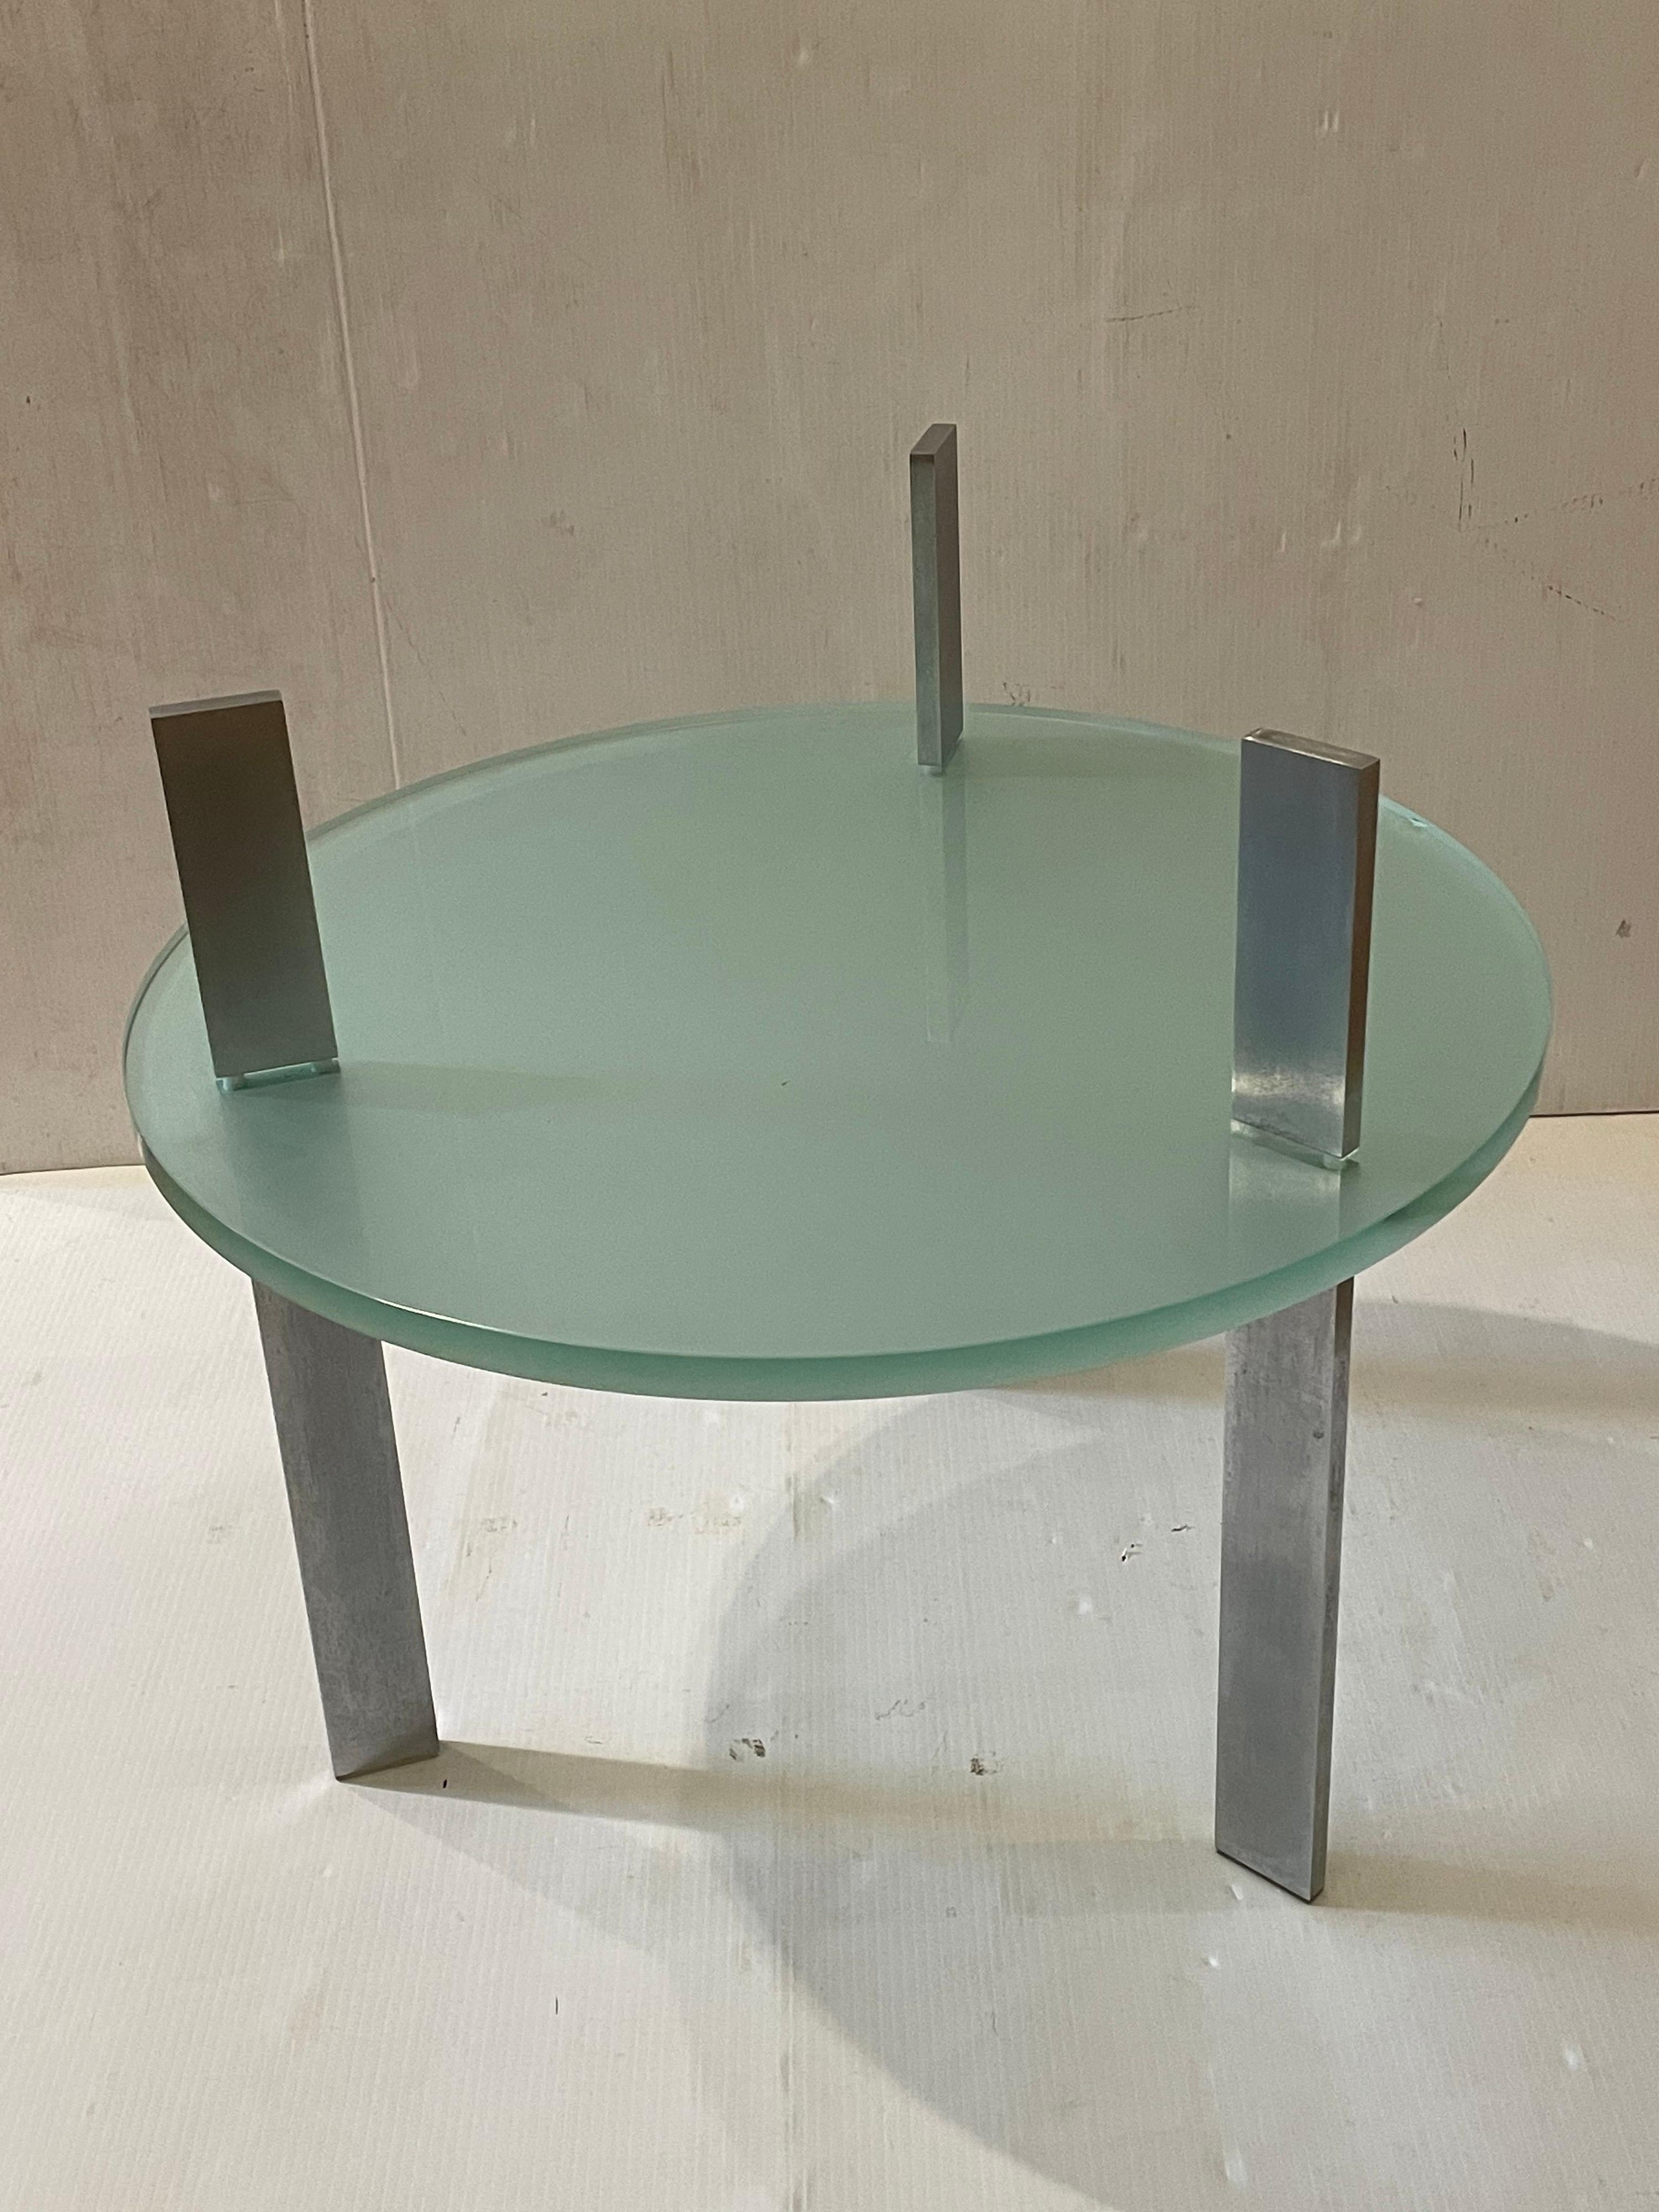 North American Pair of Postmodern Glass & Aluminum Legs Tables Designed by Peter Coan for Pace